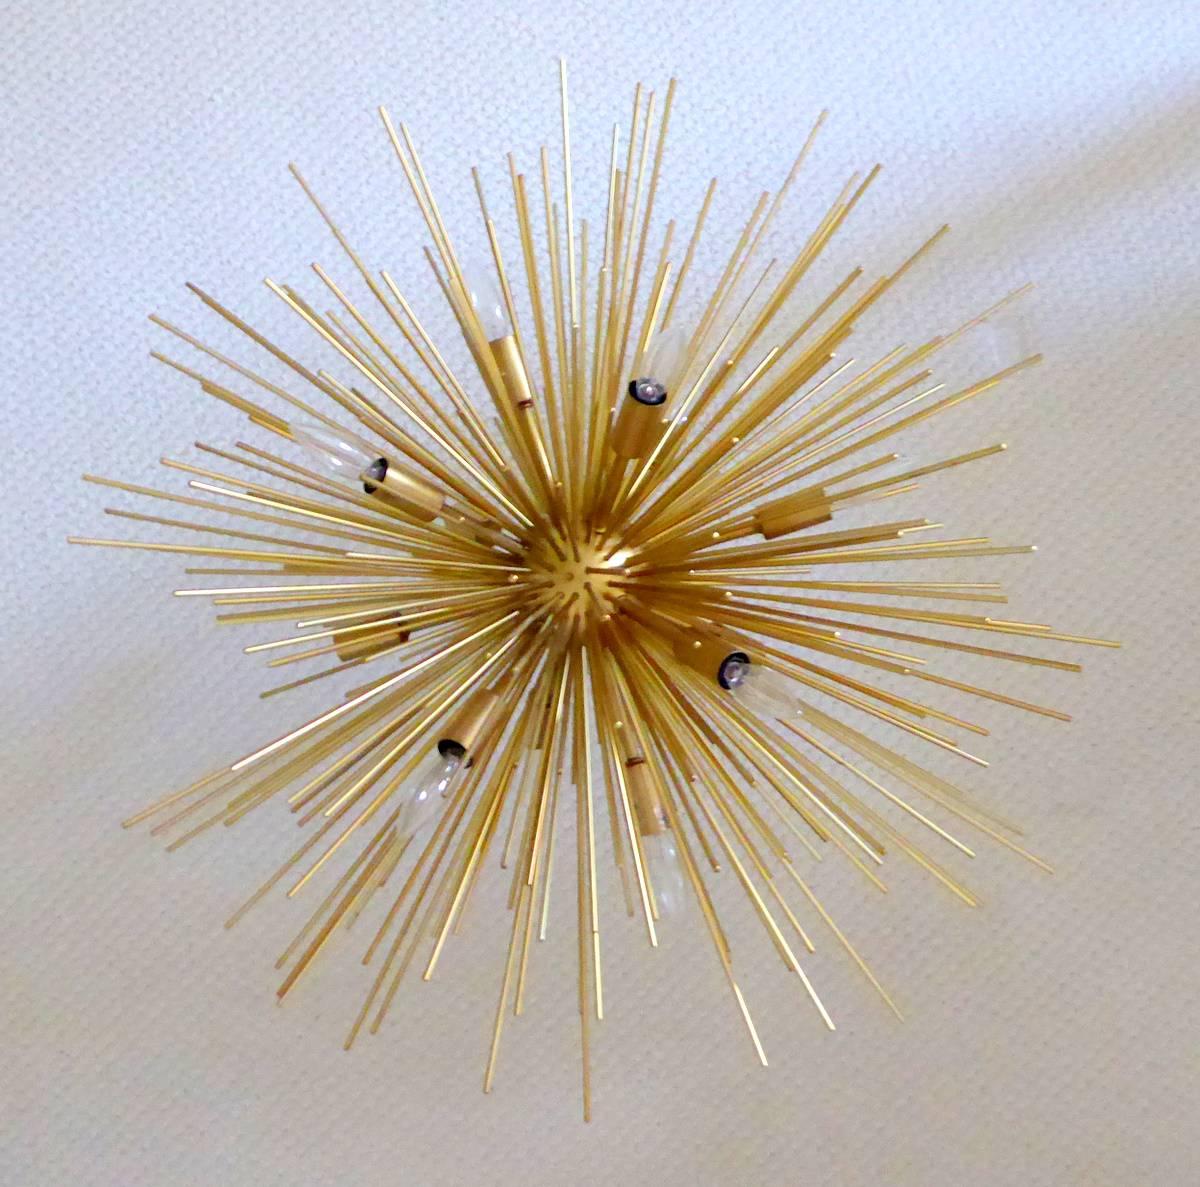 What a beauty! A gold-plated twelve-light chandelier in the Sputnik, urchin, or porcupine style. Absolutely stunning and ready to hang.

We can't be sure of the date. Although there are signs of age, the condition is too good to say 1950s -- the